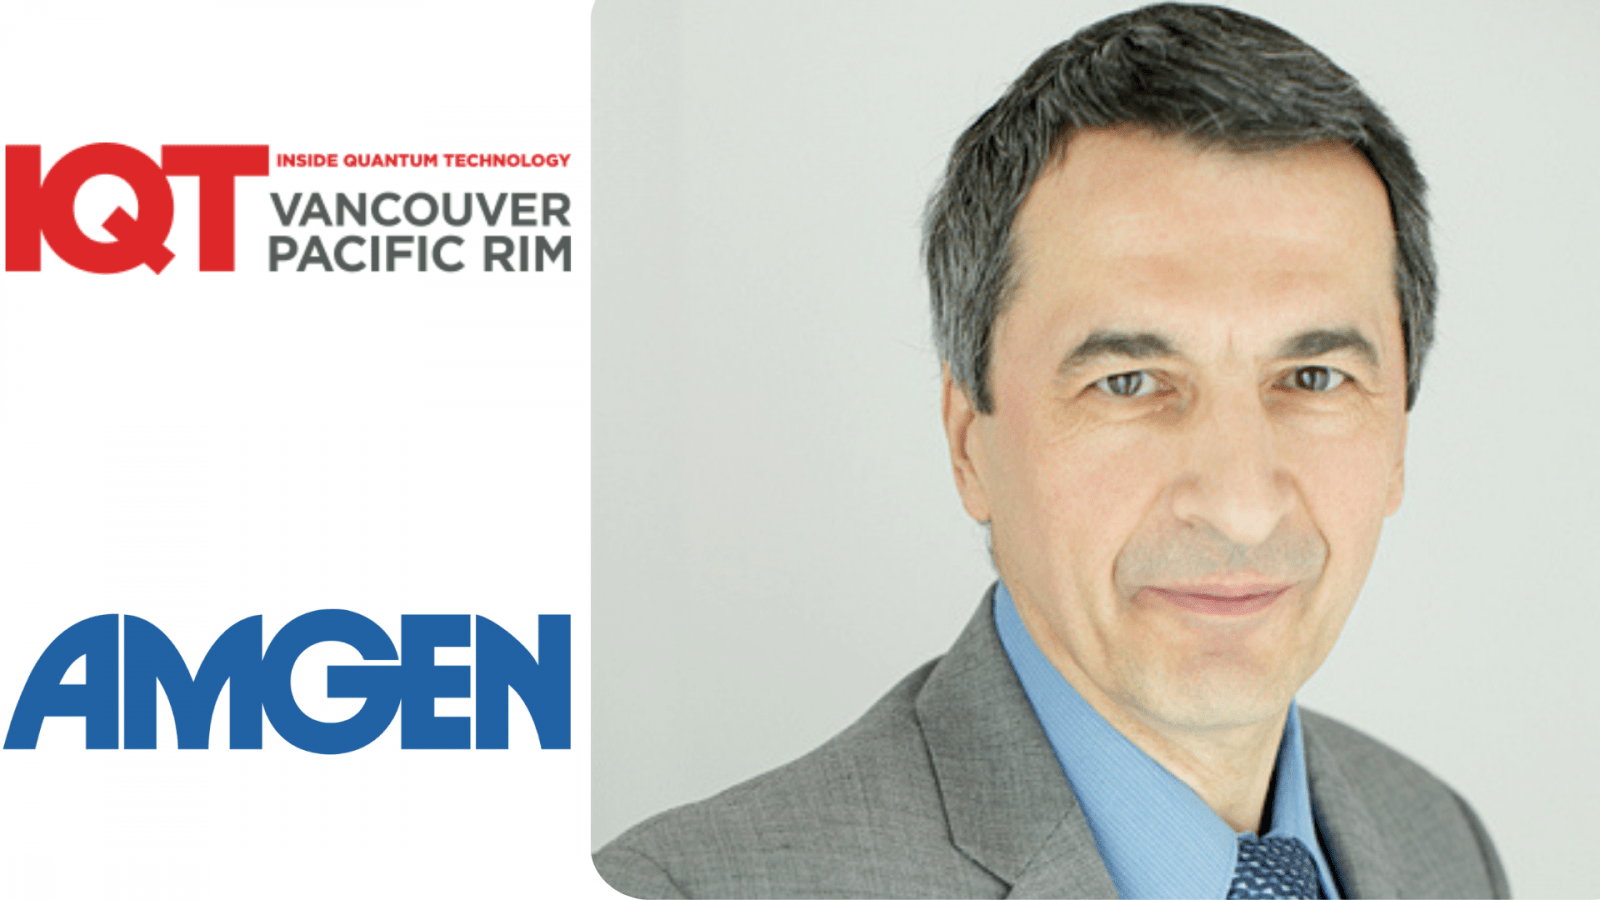 Zoran Krunic, Senior Manager of Data Science at Amgen is a 2024 IQT Vancouver/Pacific Rim Speaker